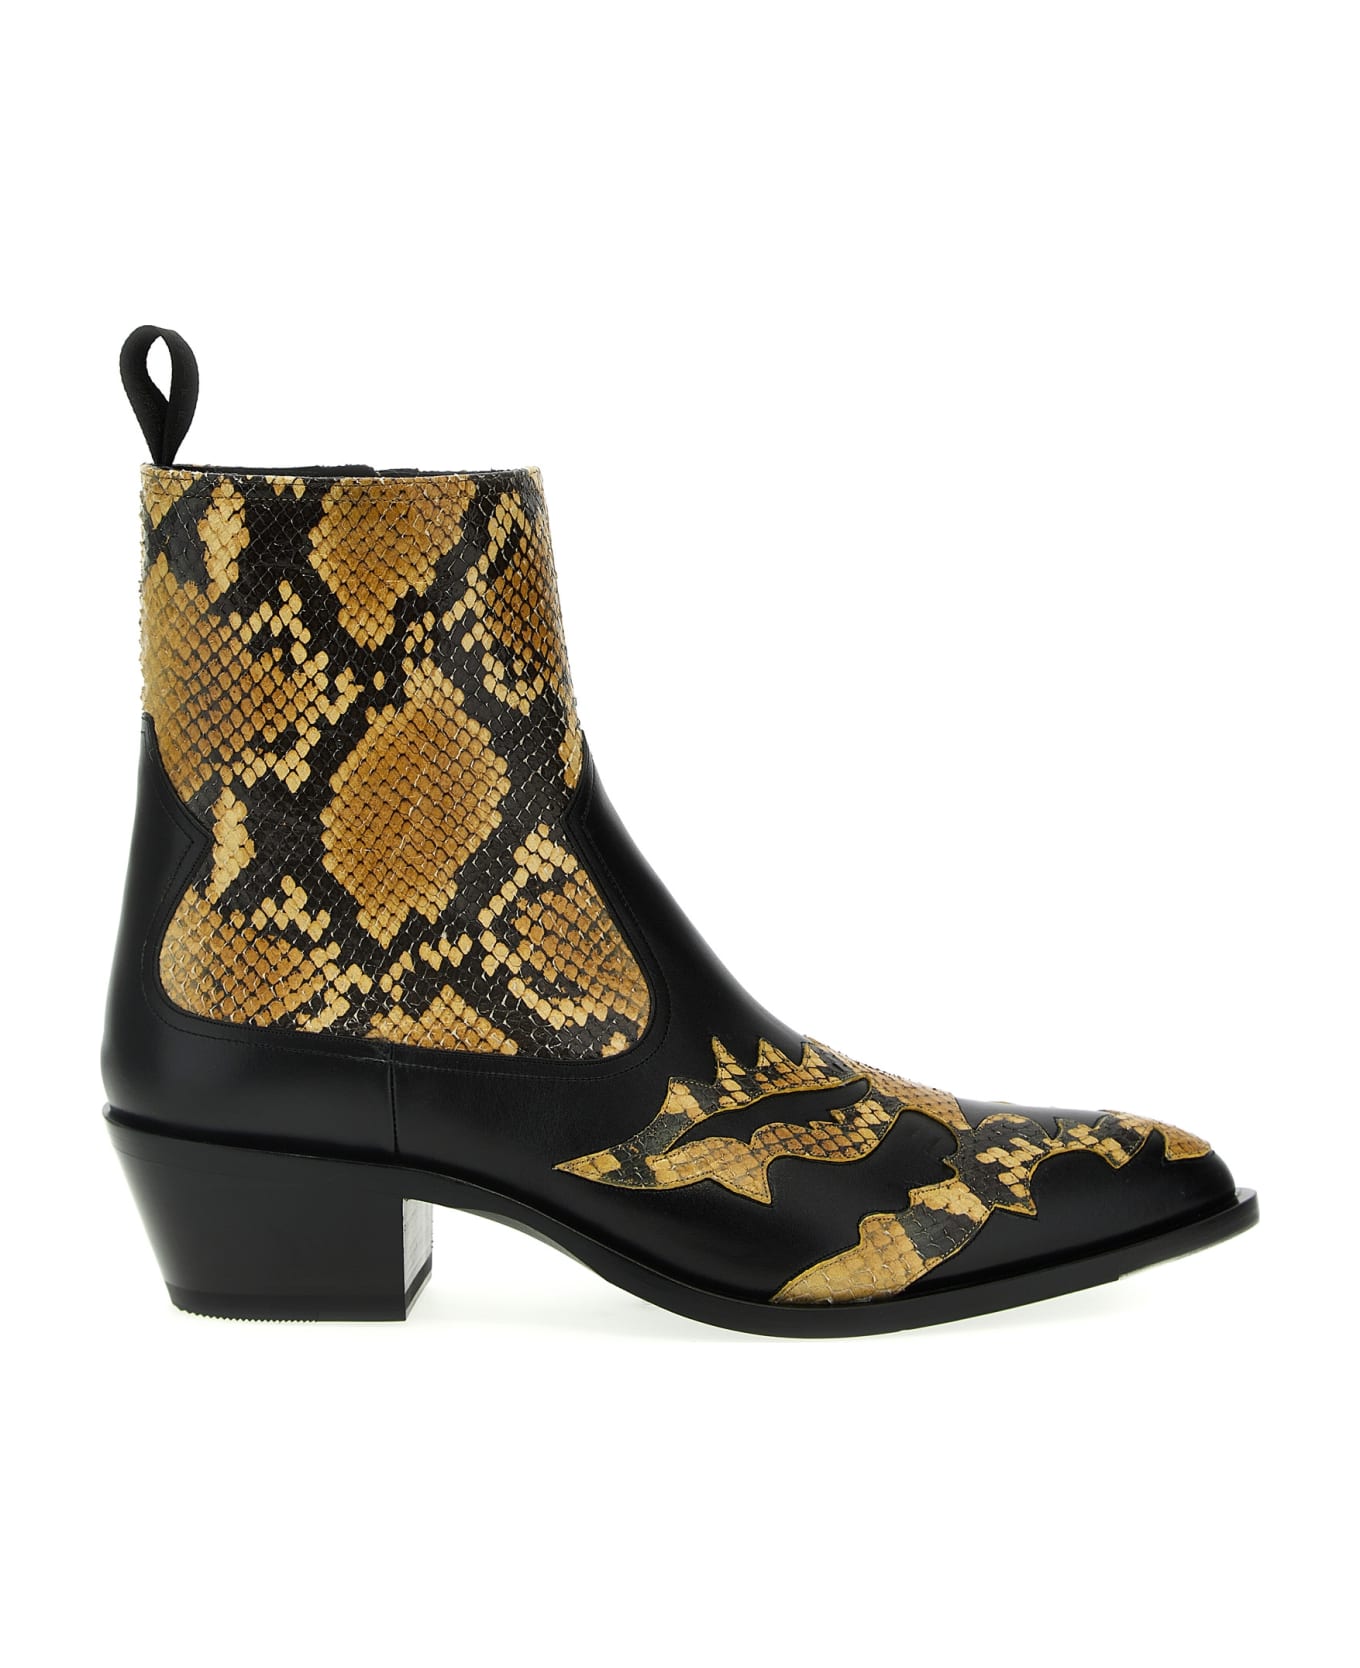 Bally 'vegas' Ankle Boots - Multicolor